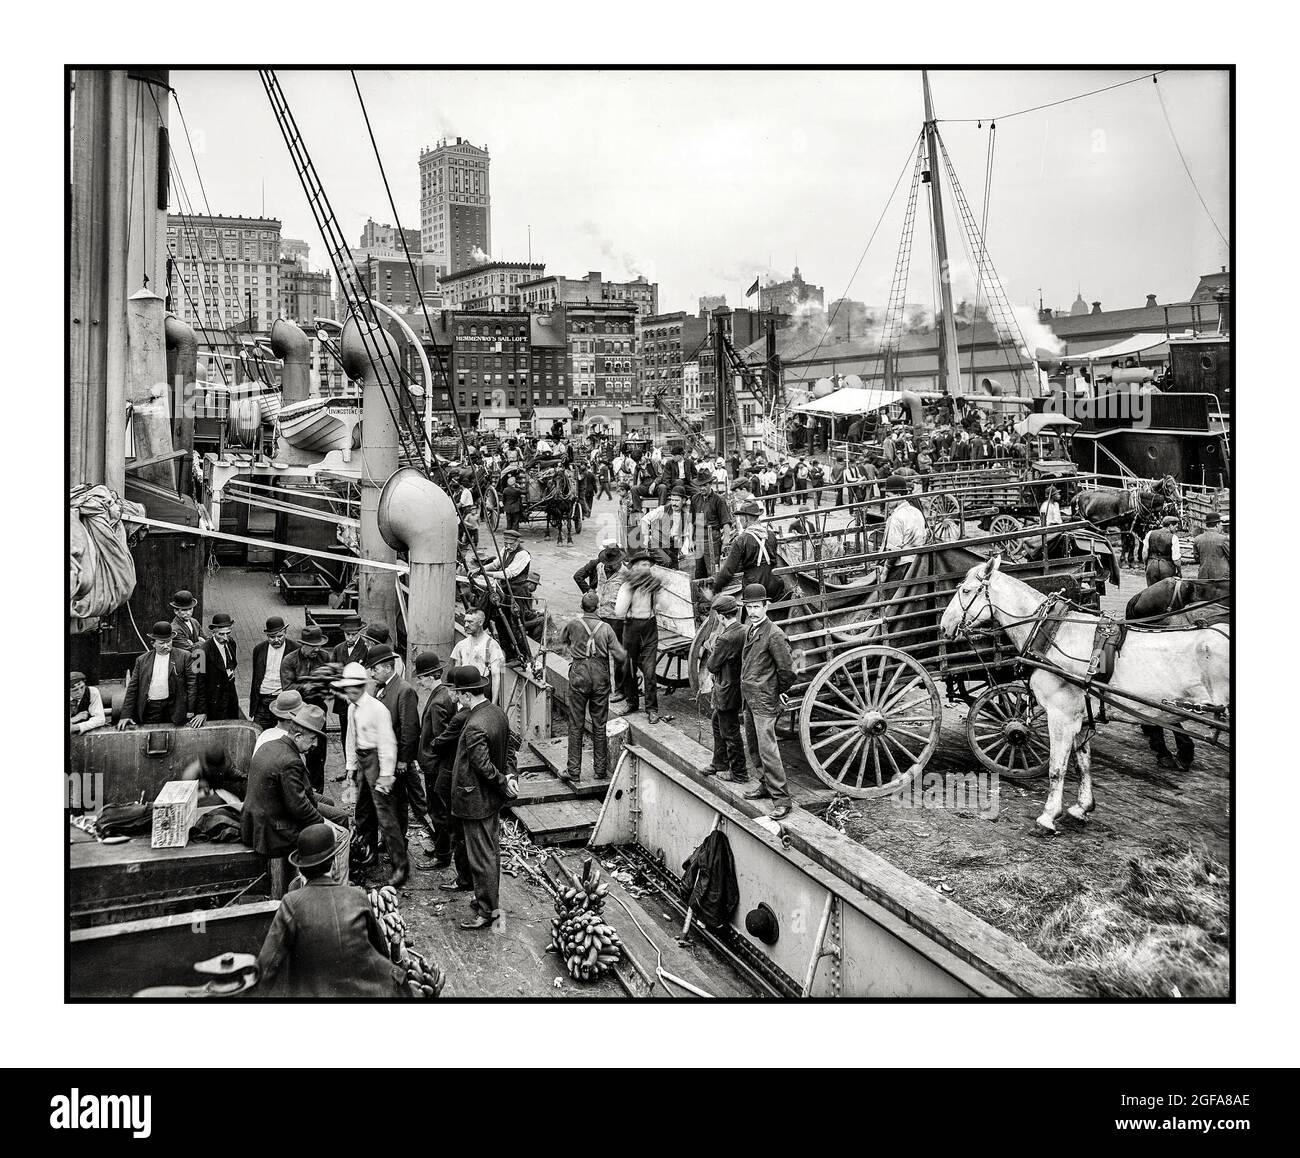 Vintage 1900s Banana docks unloading New York one of the busiest port cities in the world, fruit companies began shipping mass quantities of bananas on ships arriving at the “banana docks” at the Old Slip piers near Wall Street. ca. 1890-1910.  New York America USA Stock Photo